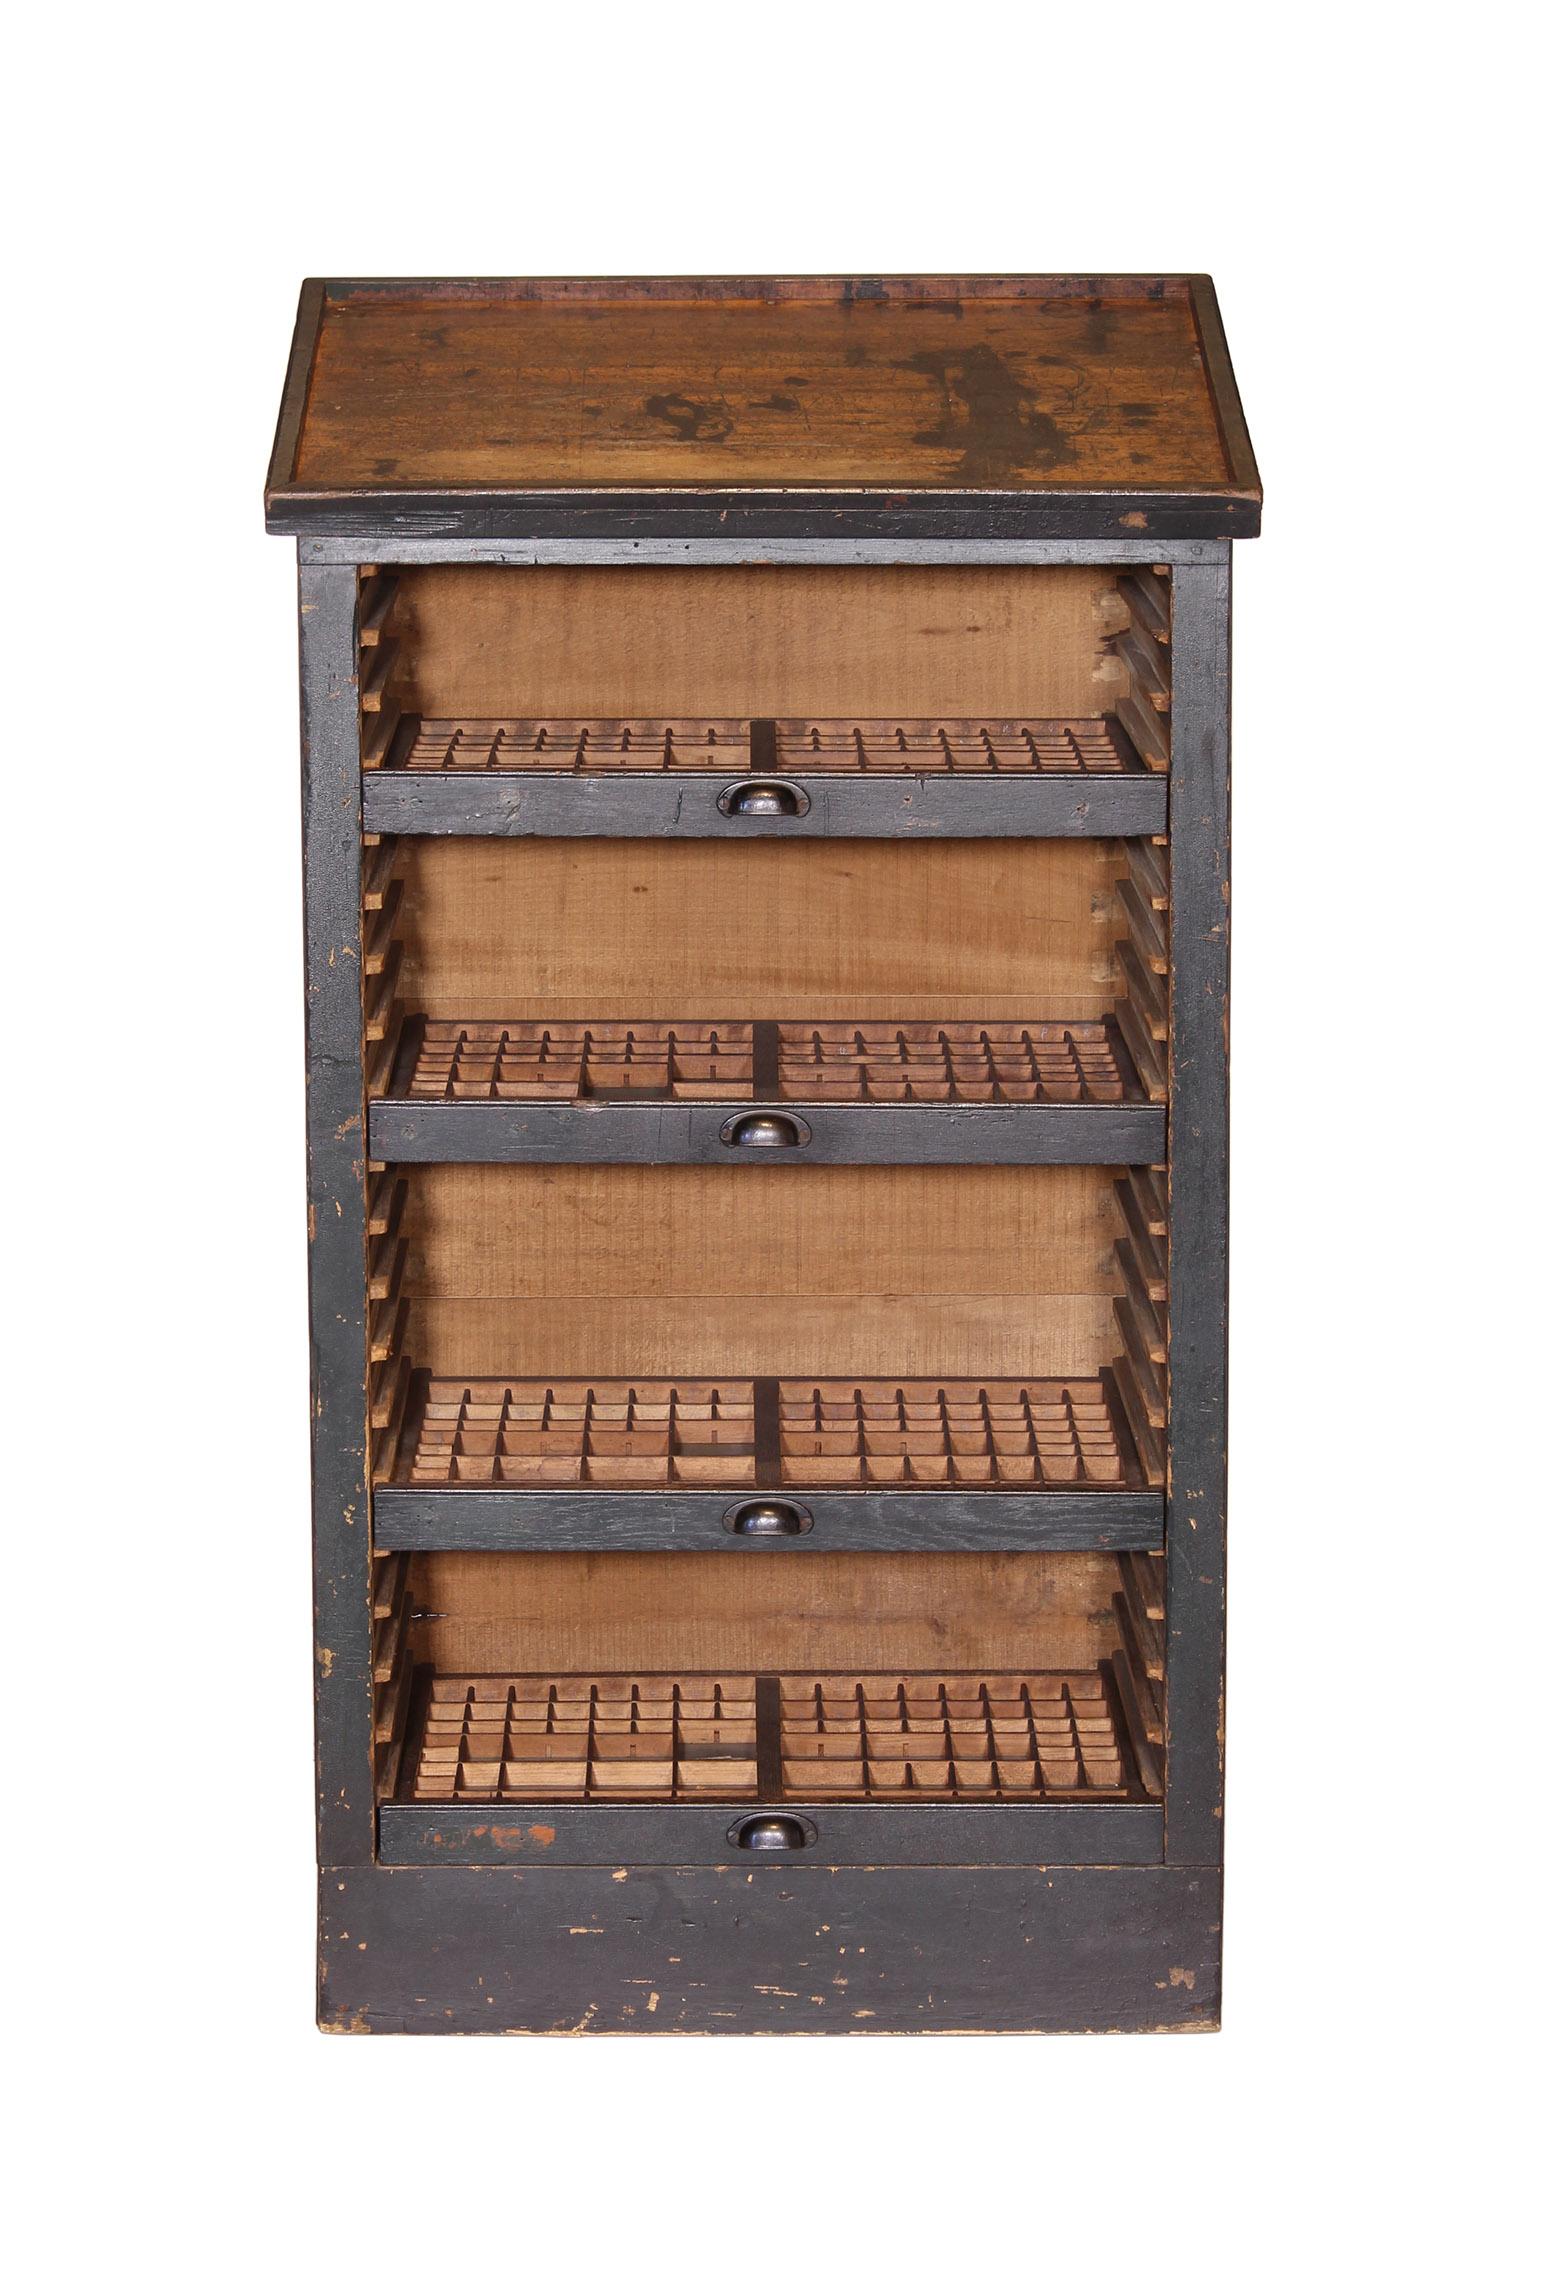 Original printers typeset cabinet, reconfigured to act as Hostess station or lectern. All original condition with normal wear commeserate with age. Additional typeset trays available for this unit. Dimensions: overall width 27.5